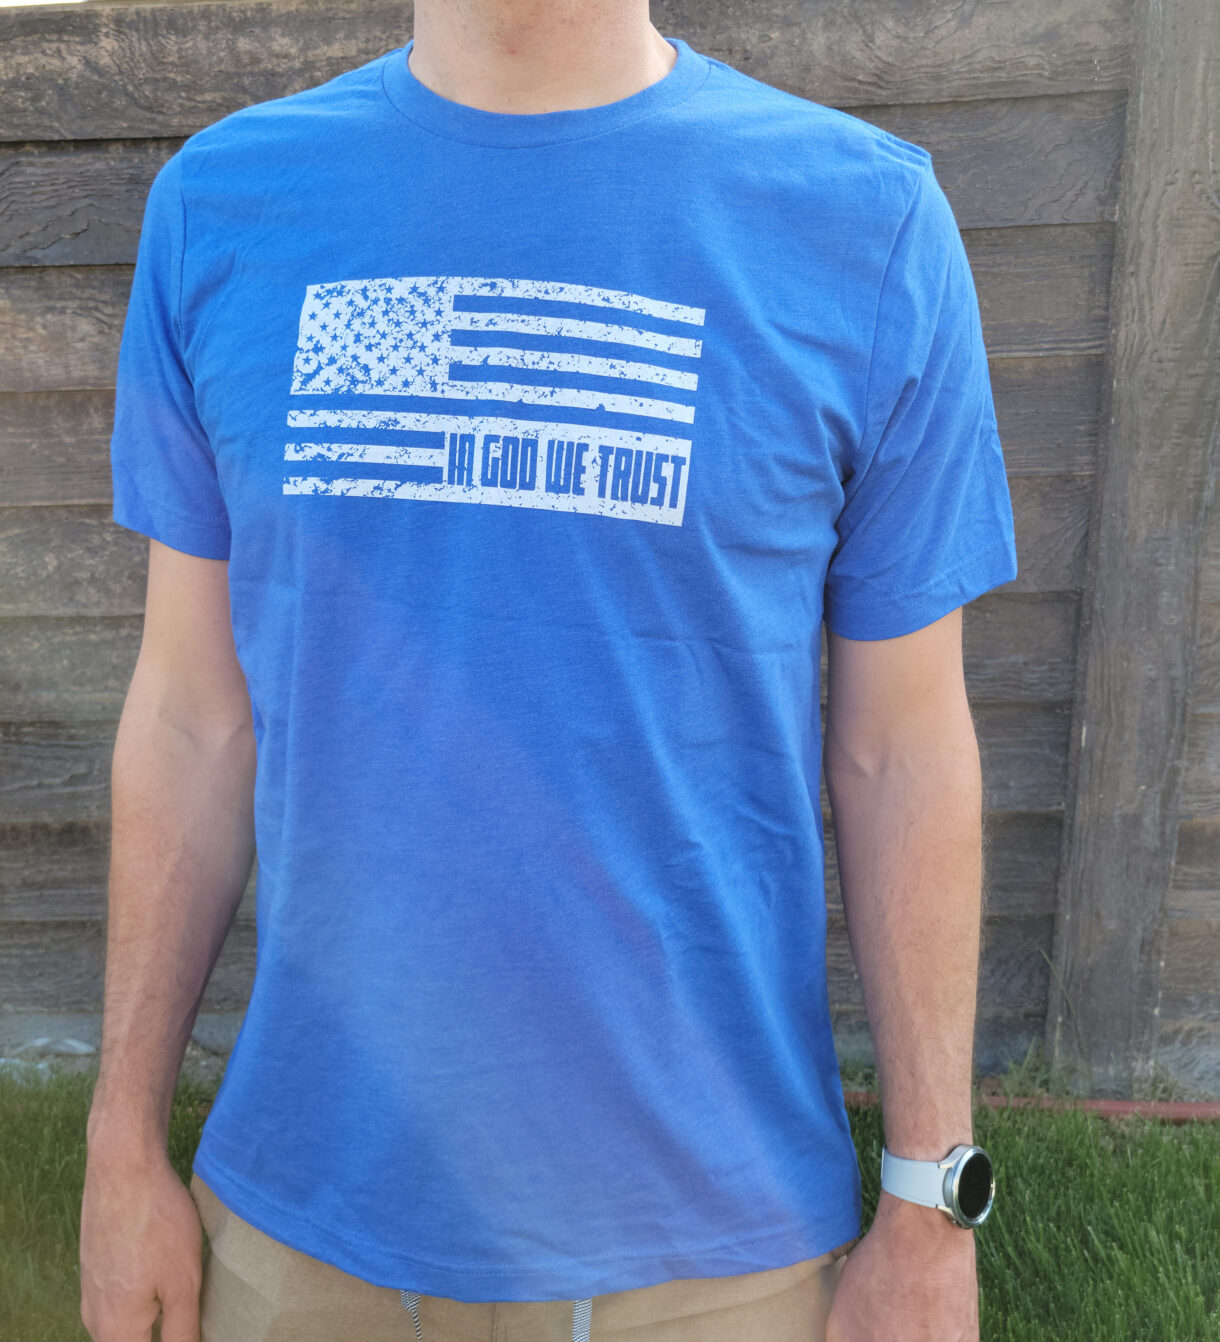 Blue tee with white flag and in god we trust